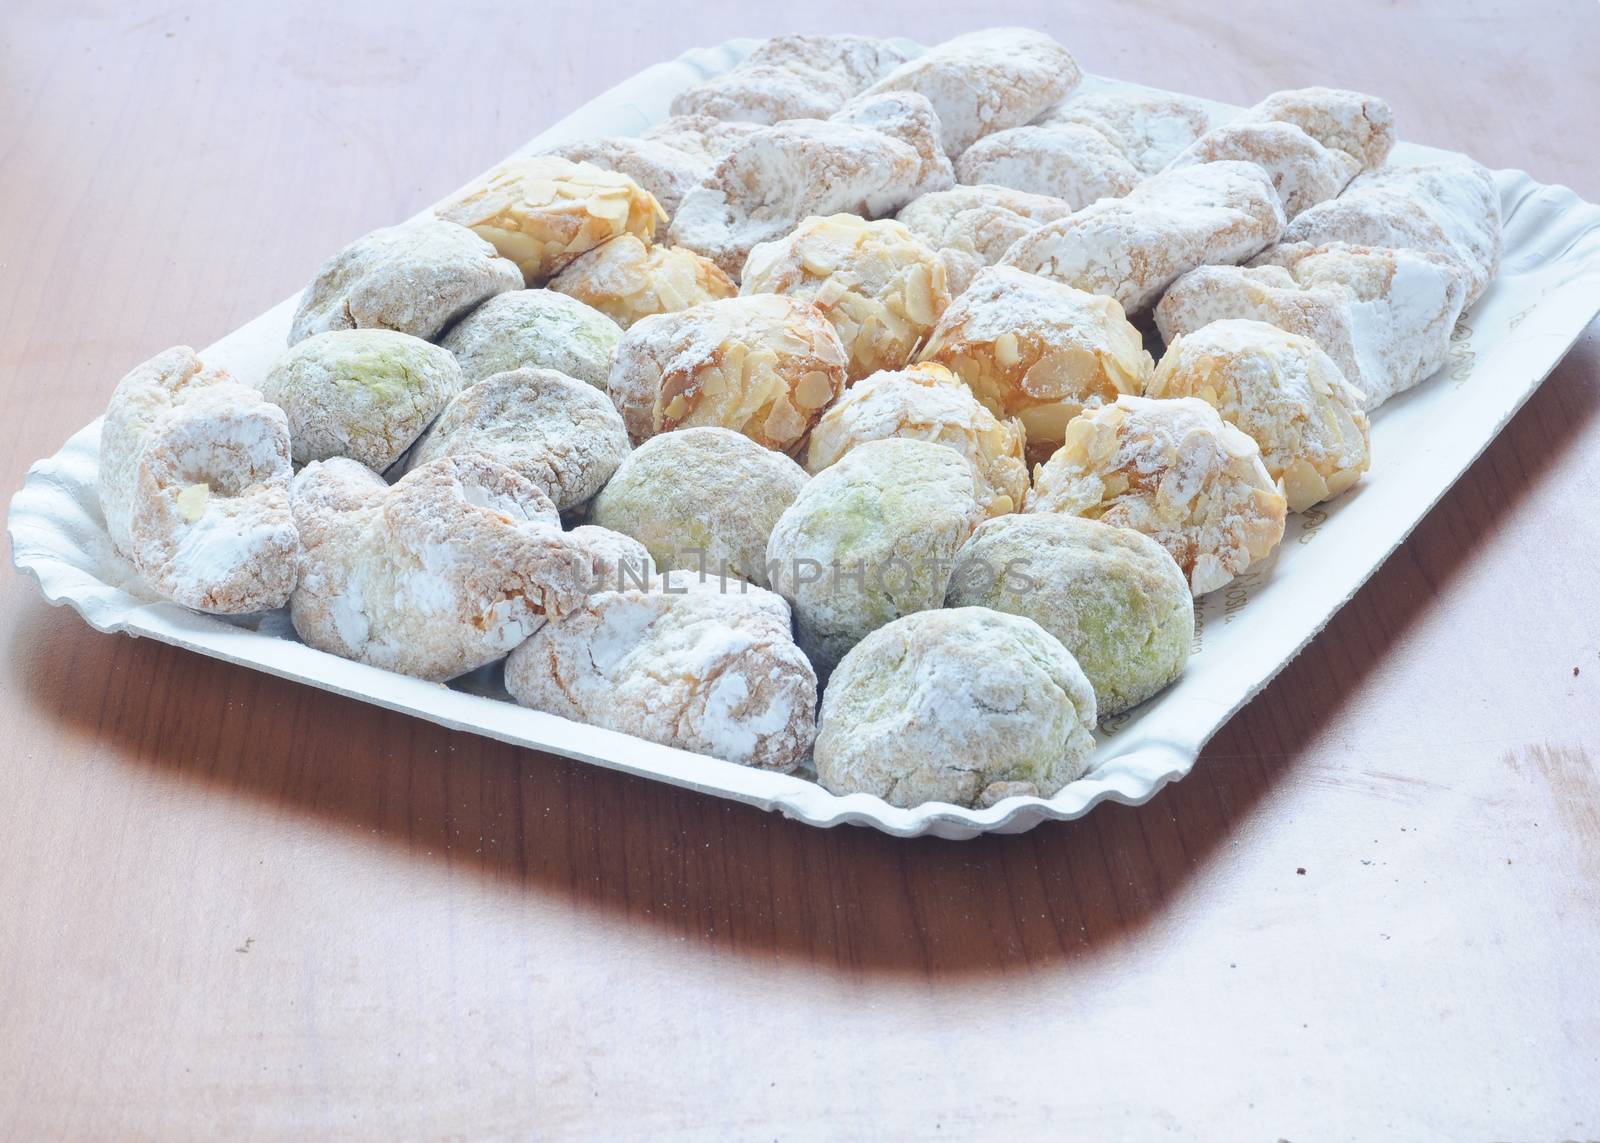 Sicilian sweets made with almond paste